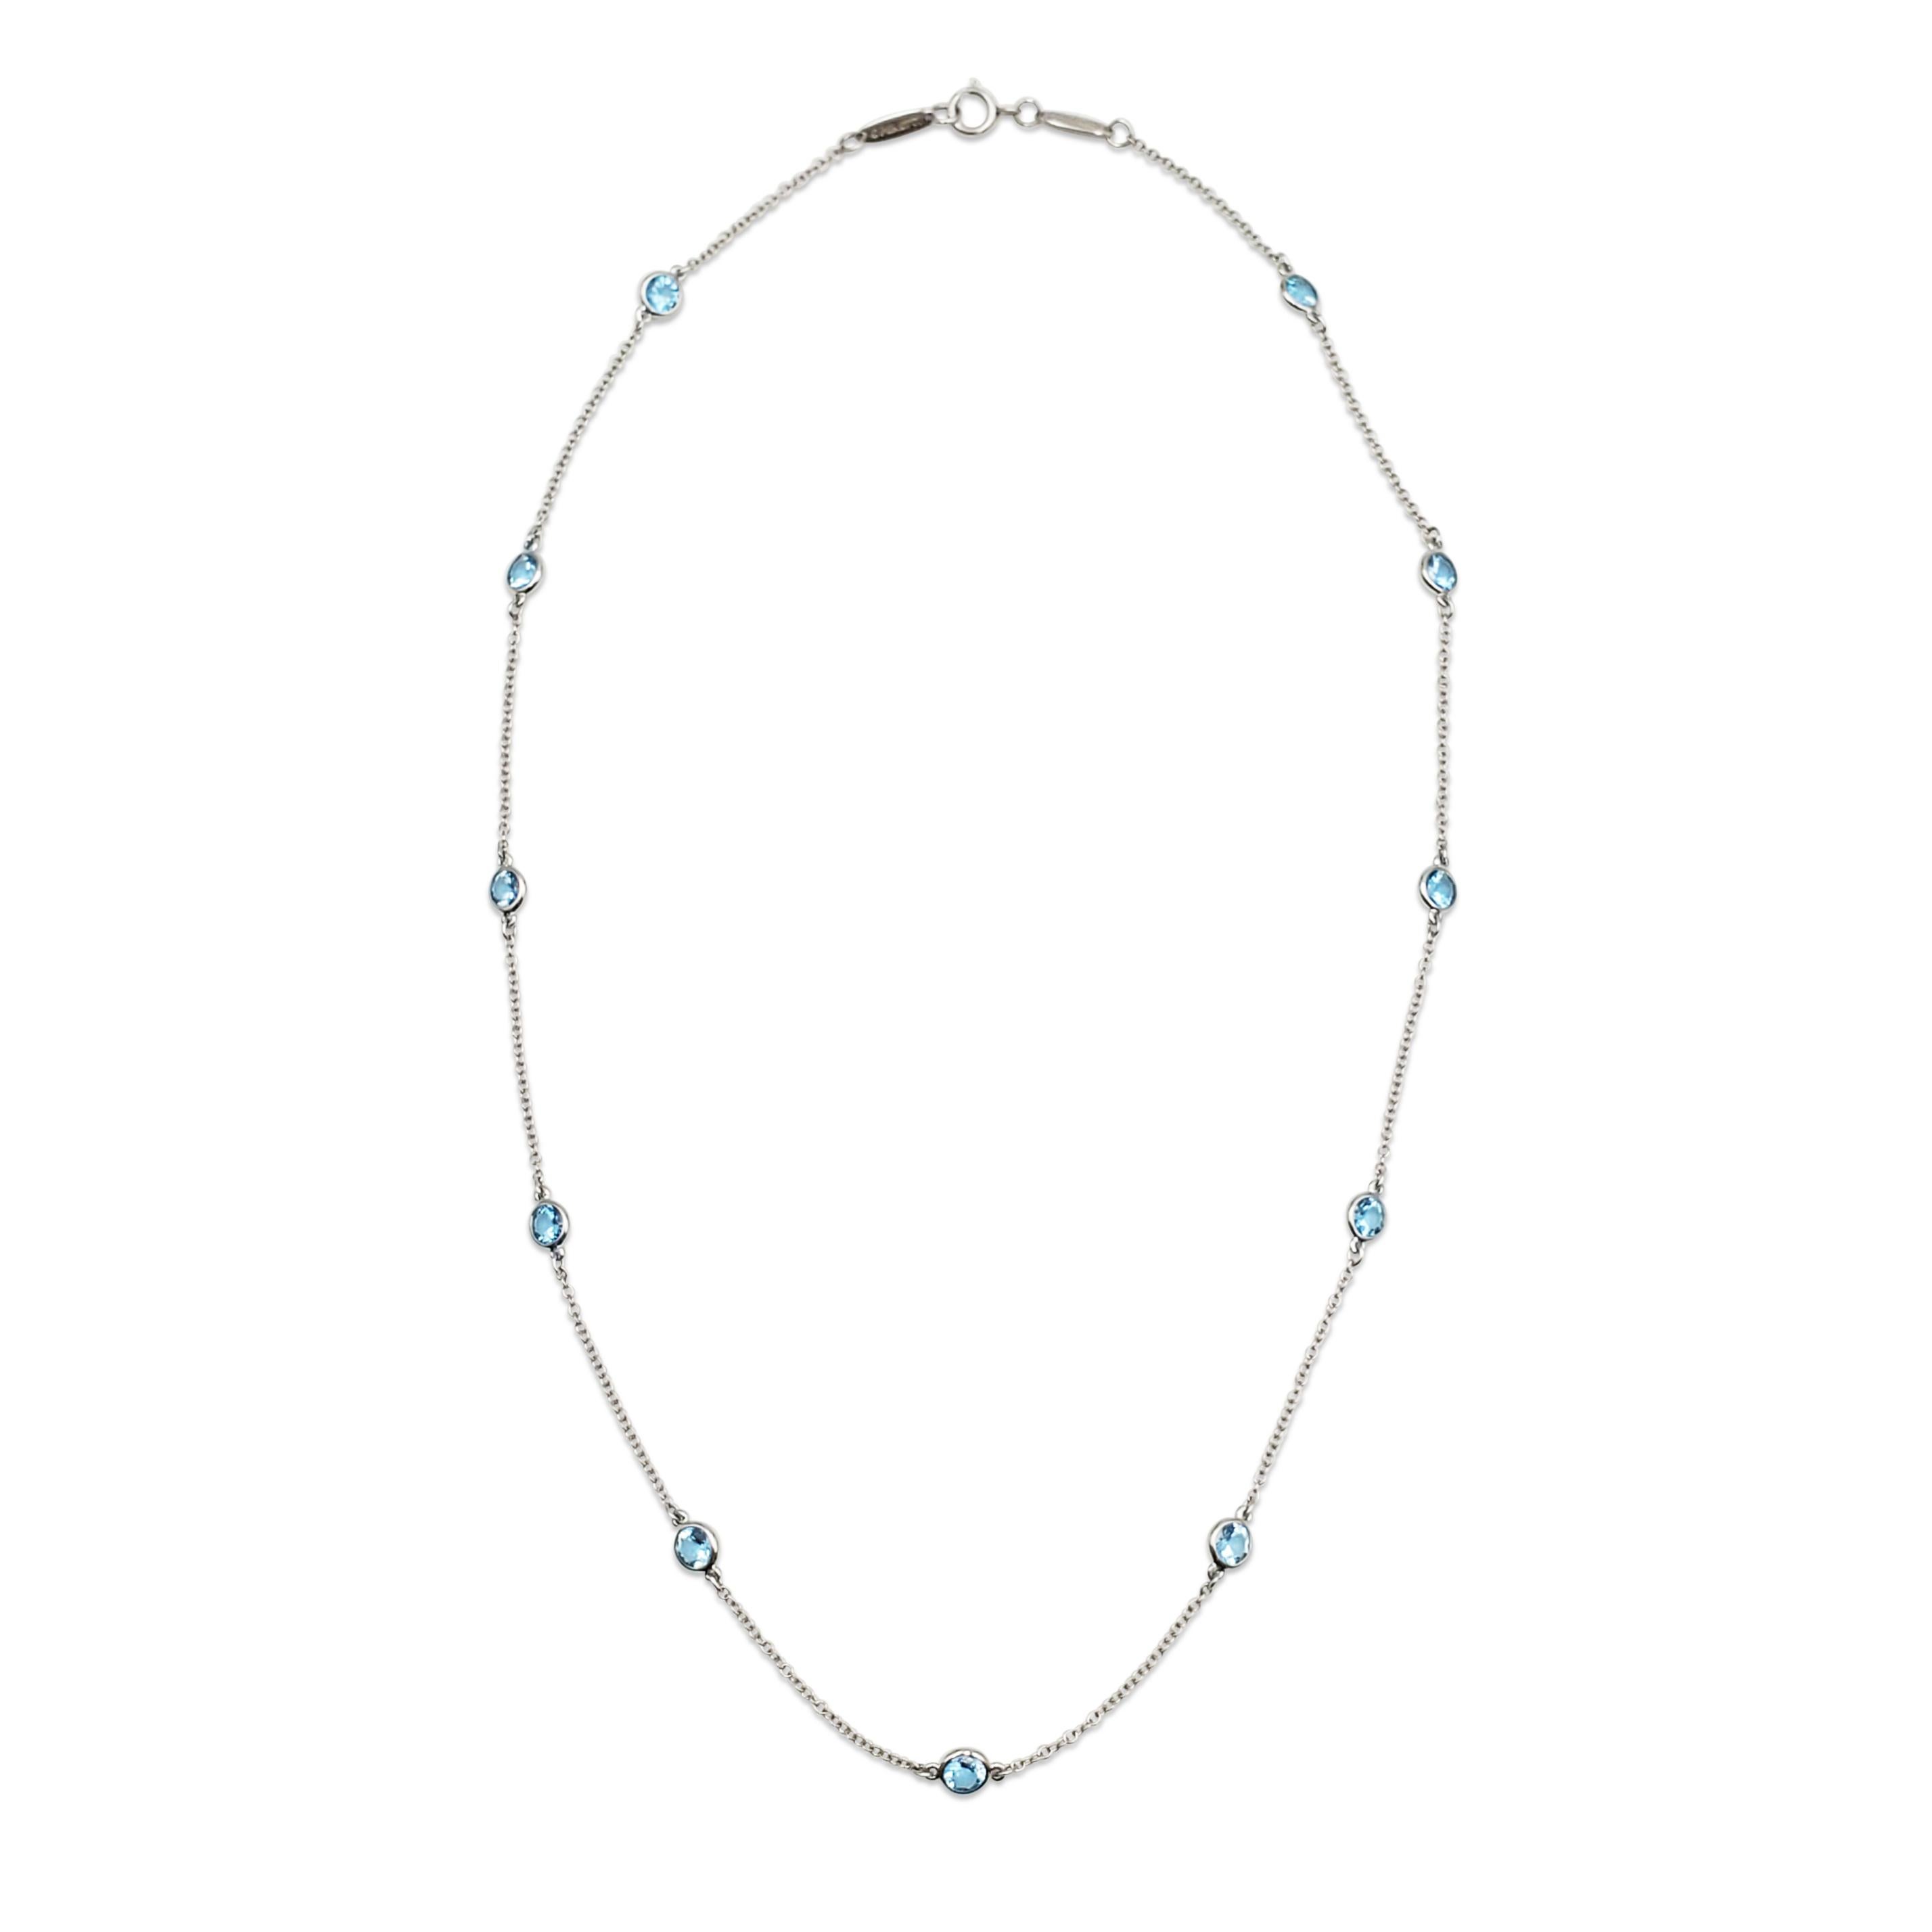 Round Cut Elsa Peretti for Tiffany & Co. 'Color by the Yard' Aquamarine Necklace